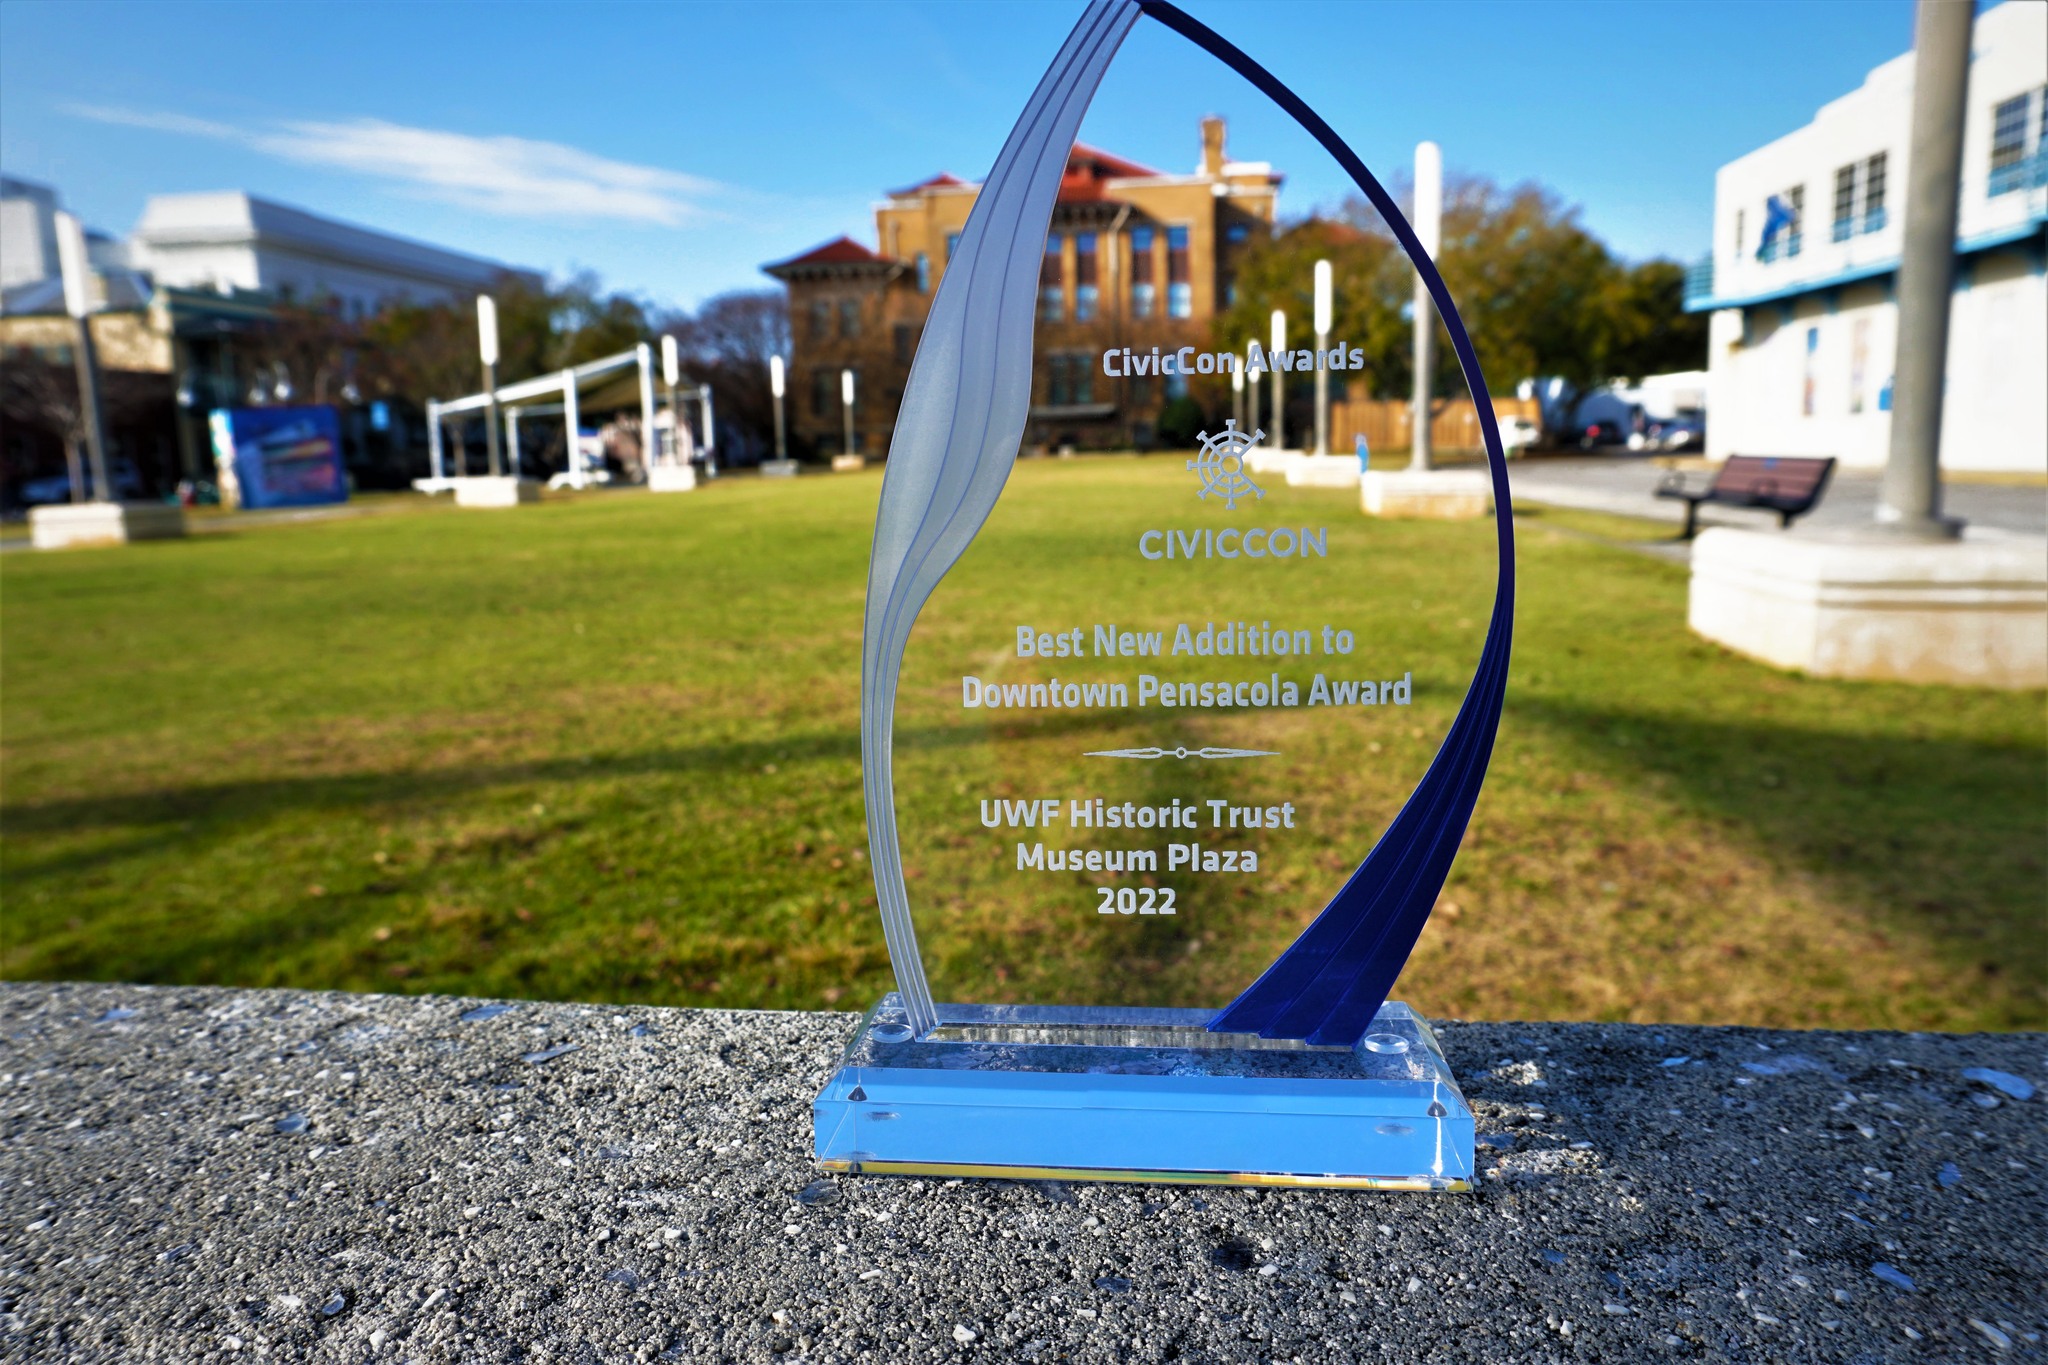 A picture of the CivicCon Award for Best New Addition to Downtown Pensacola for 2022.